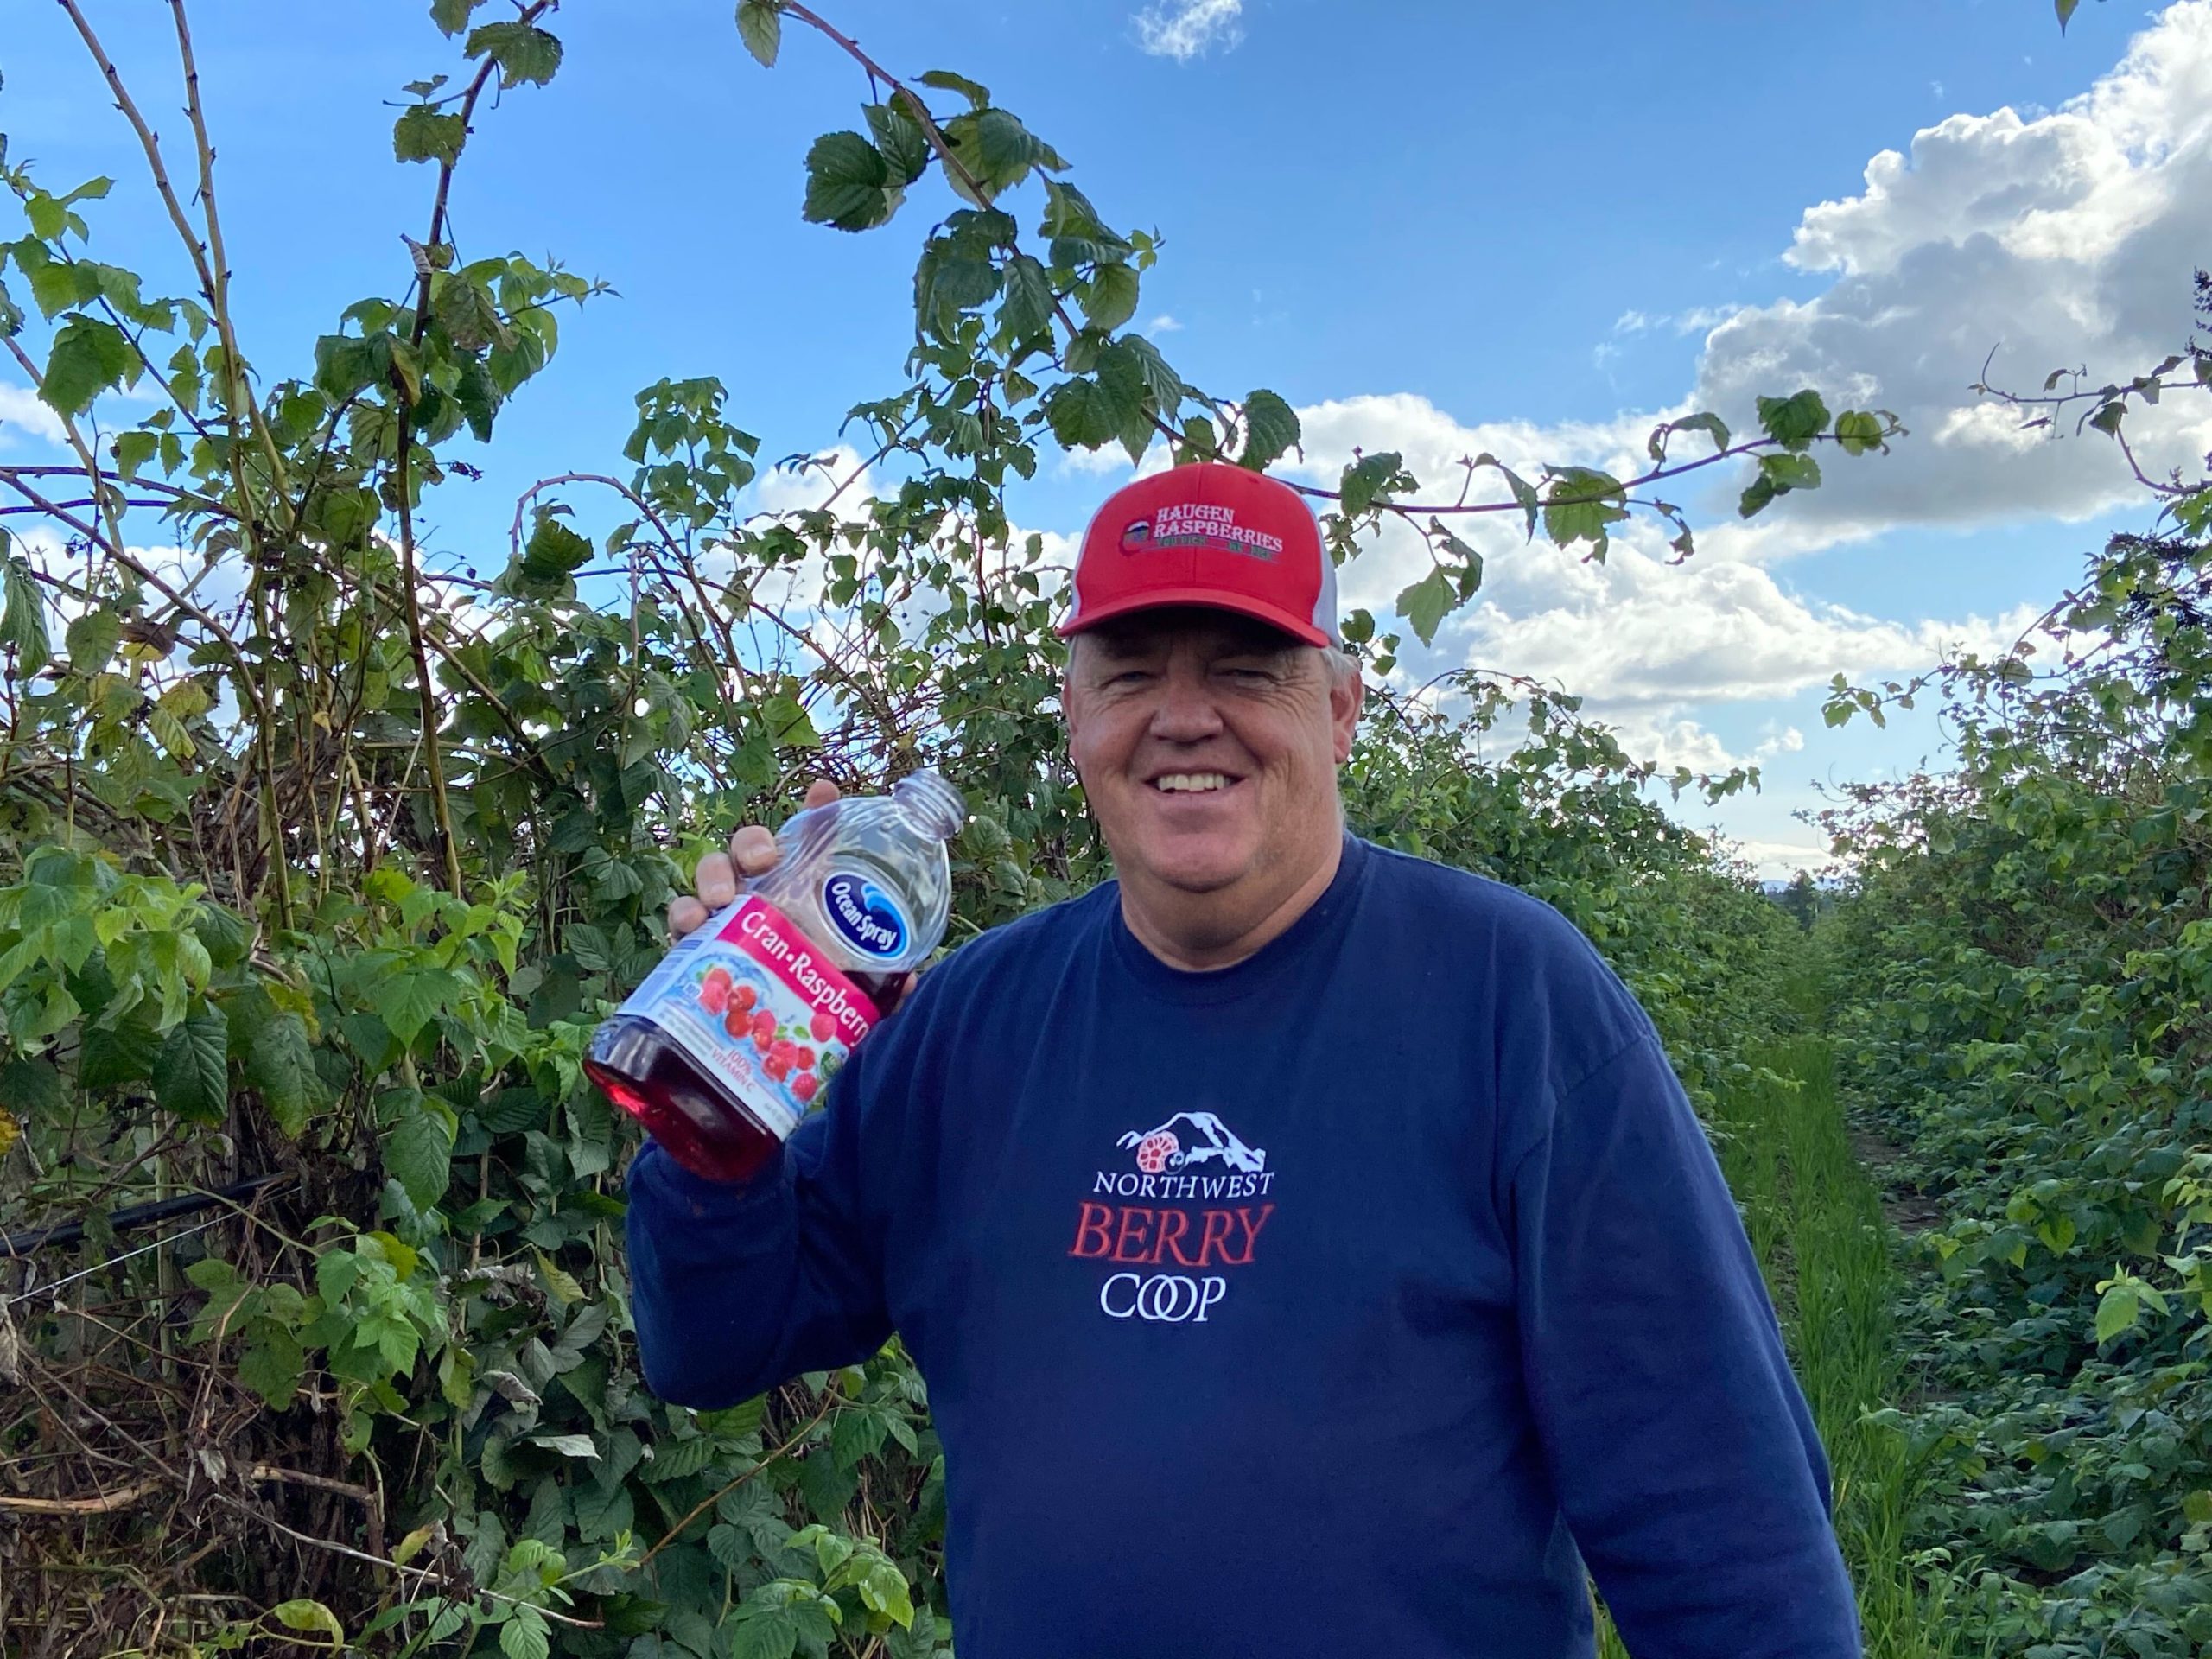 Rolf Haugen, a raspberry grower in Lynden, Washington, decided to get into the spirit of the viral TikTok video and take a picture with a jug of juice in his berry fields.